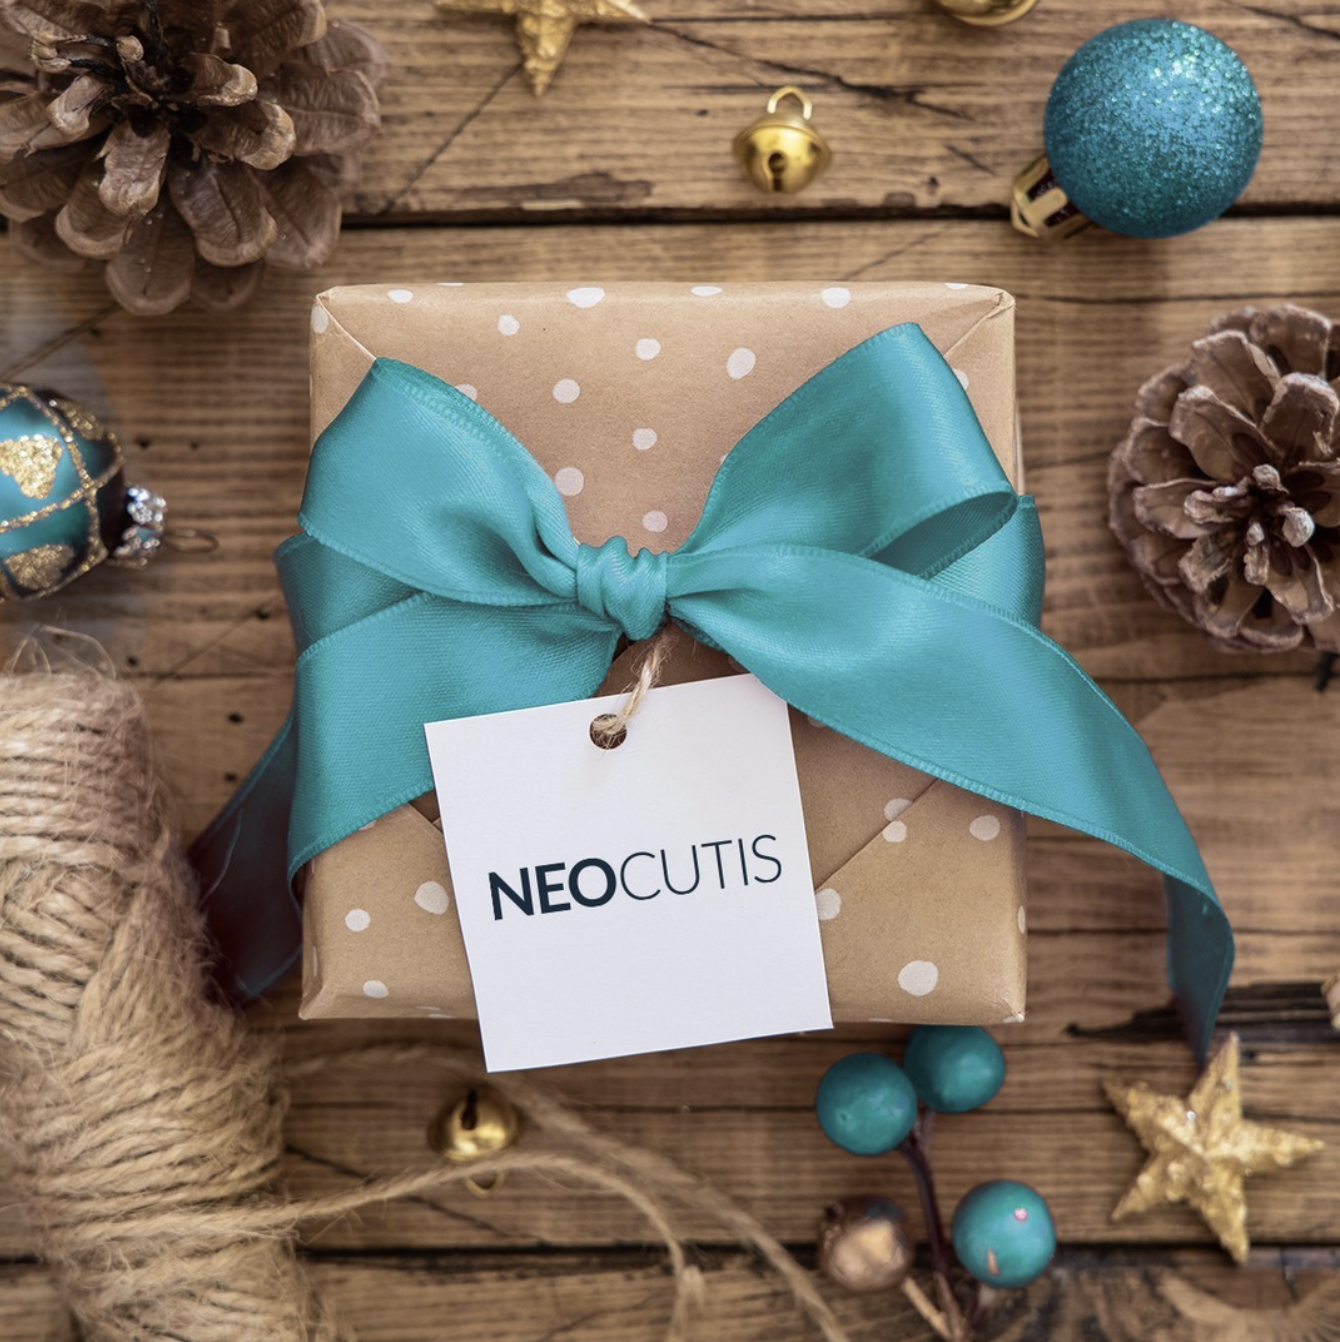 SkinStore Coupon: Get 30% Off On Neocutis